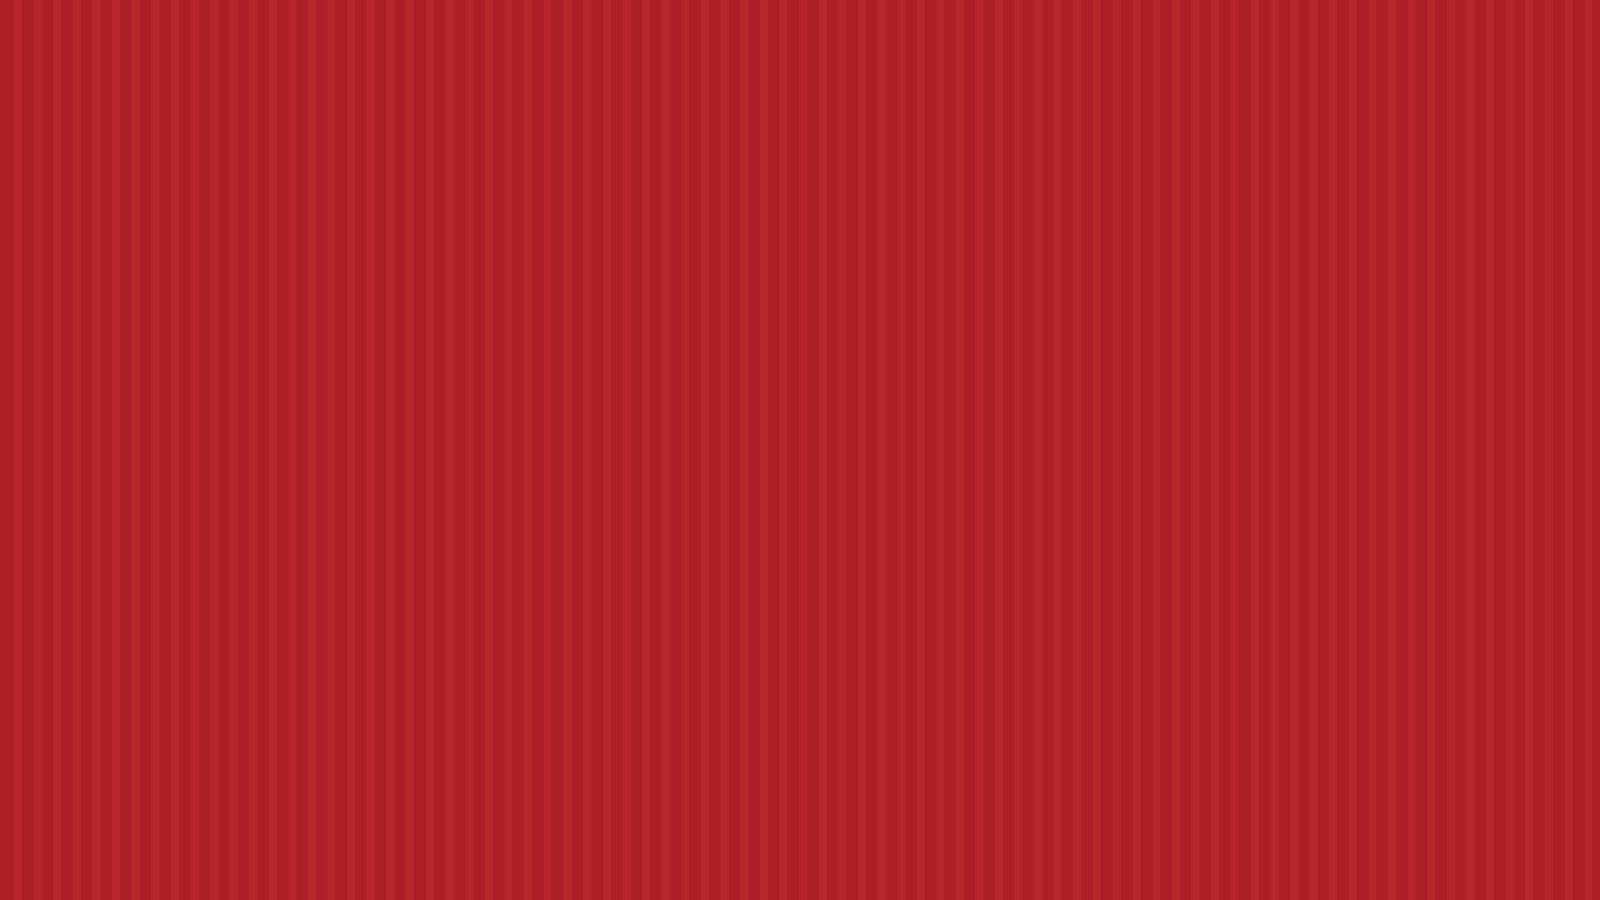 Solid Red Backgrounds, wallpaper, Solid Red Backgrounds hd